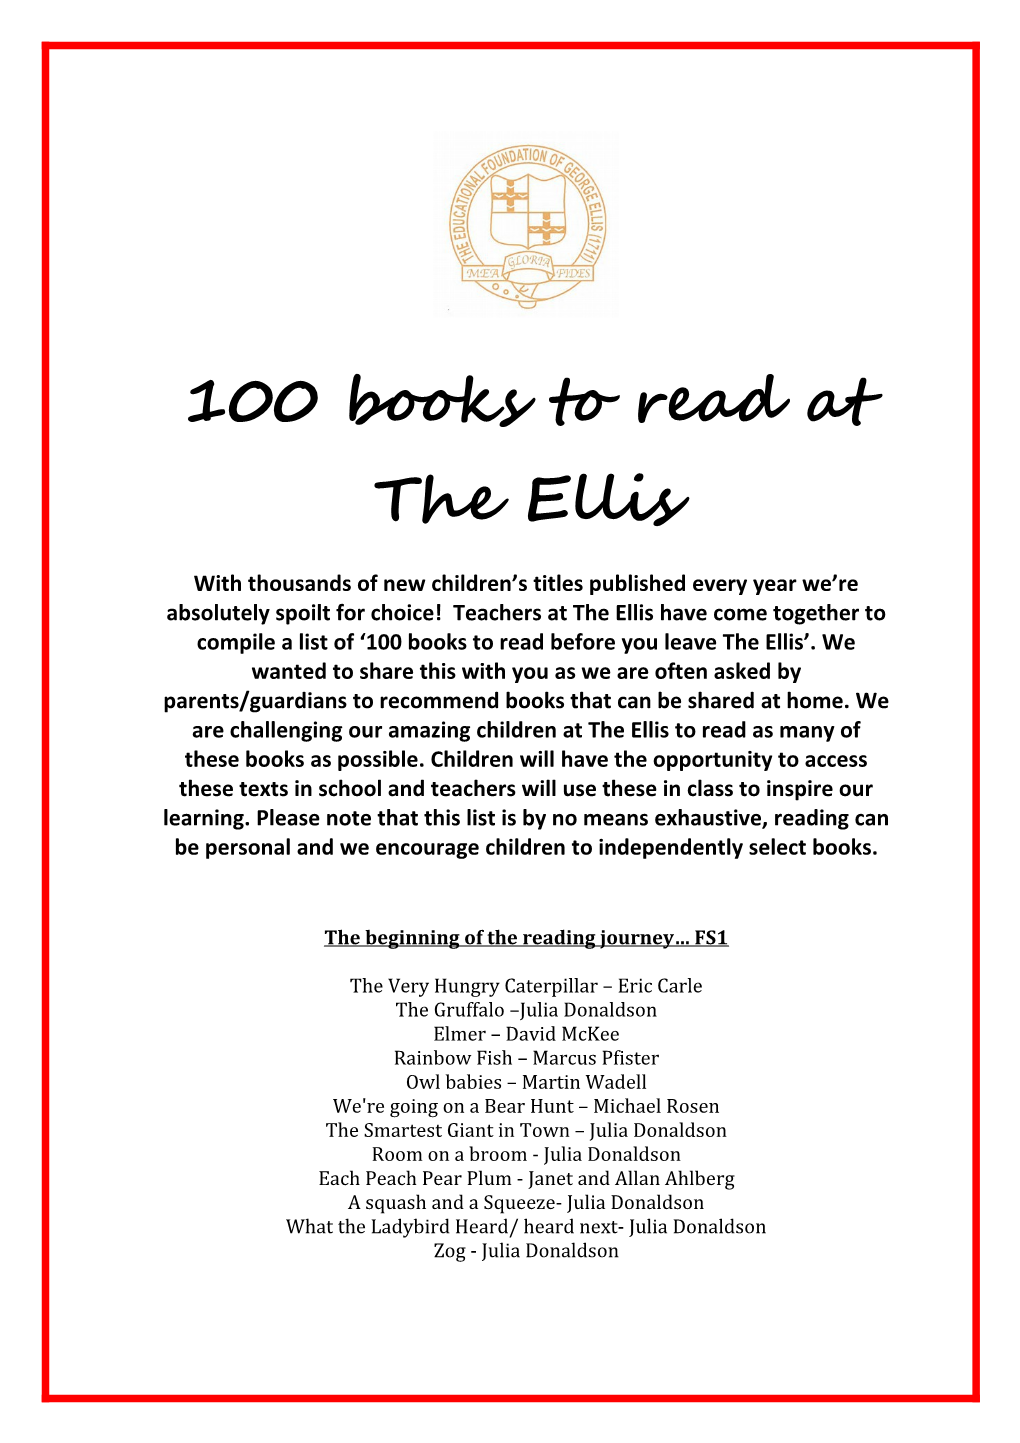 100 Books to Read at the Ellis